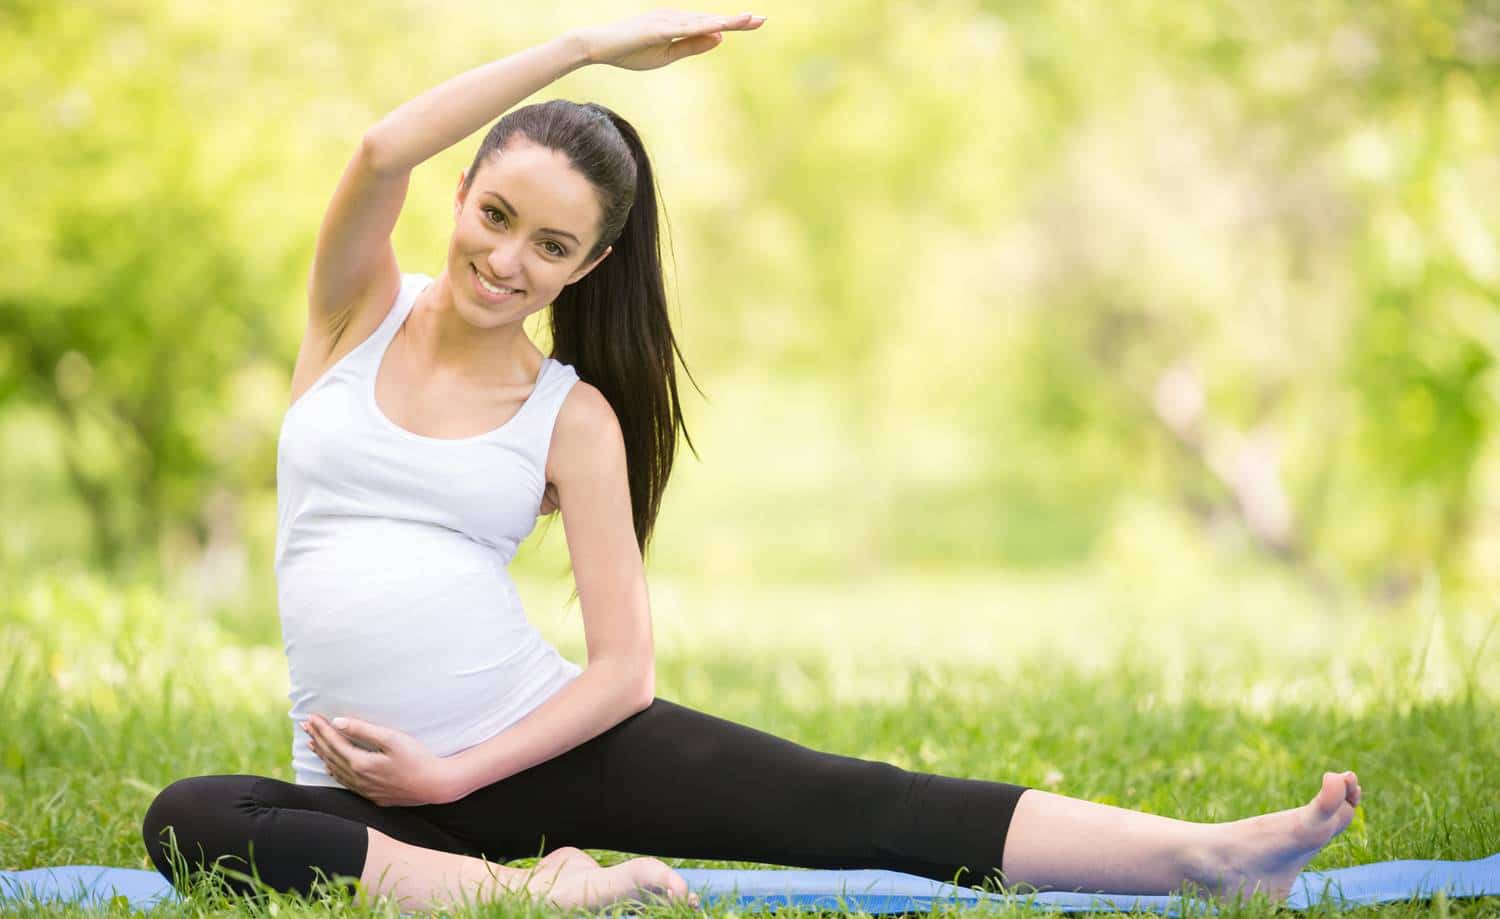 Pregnancy And Exercises